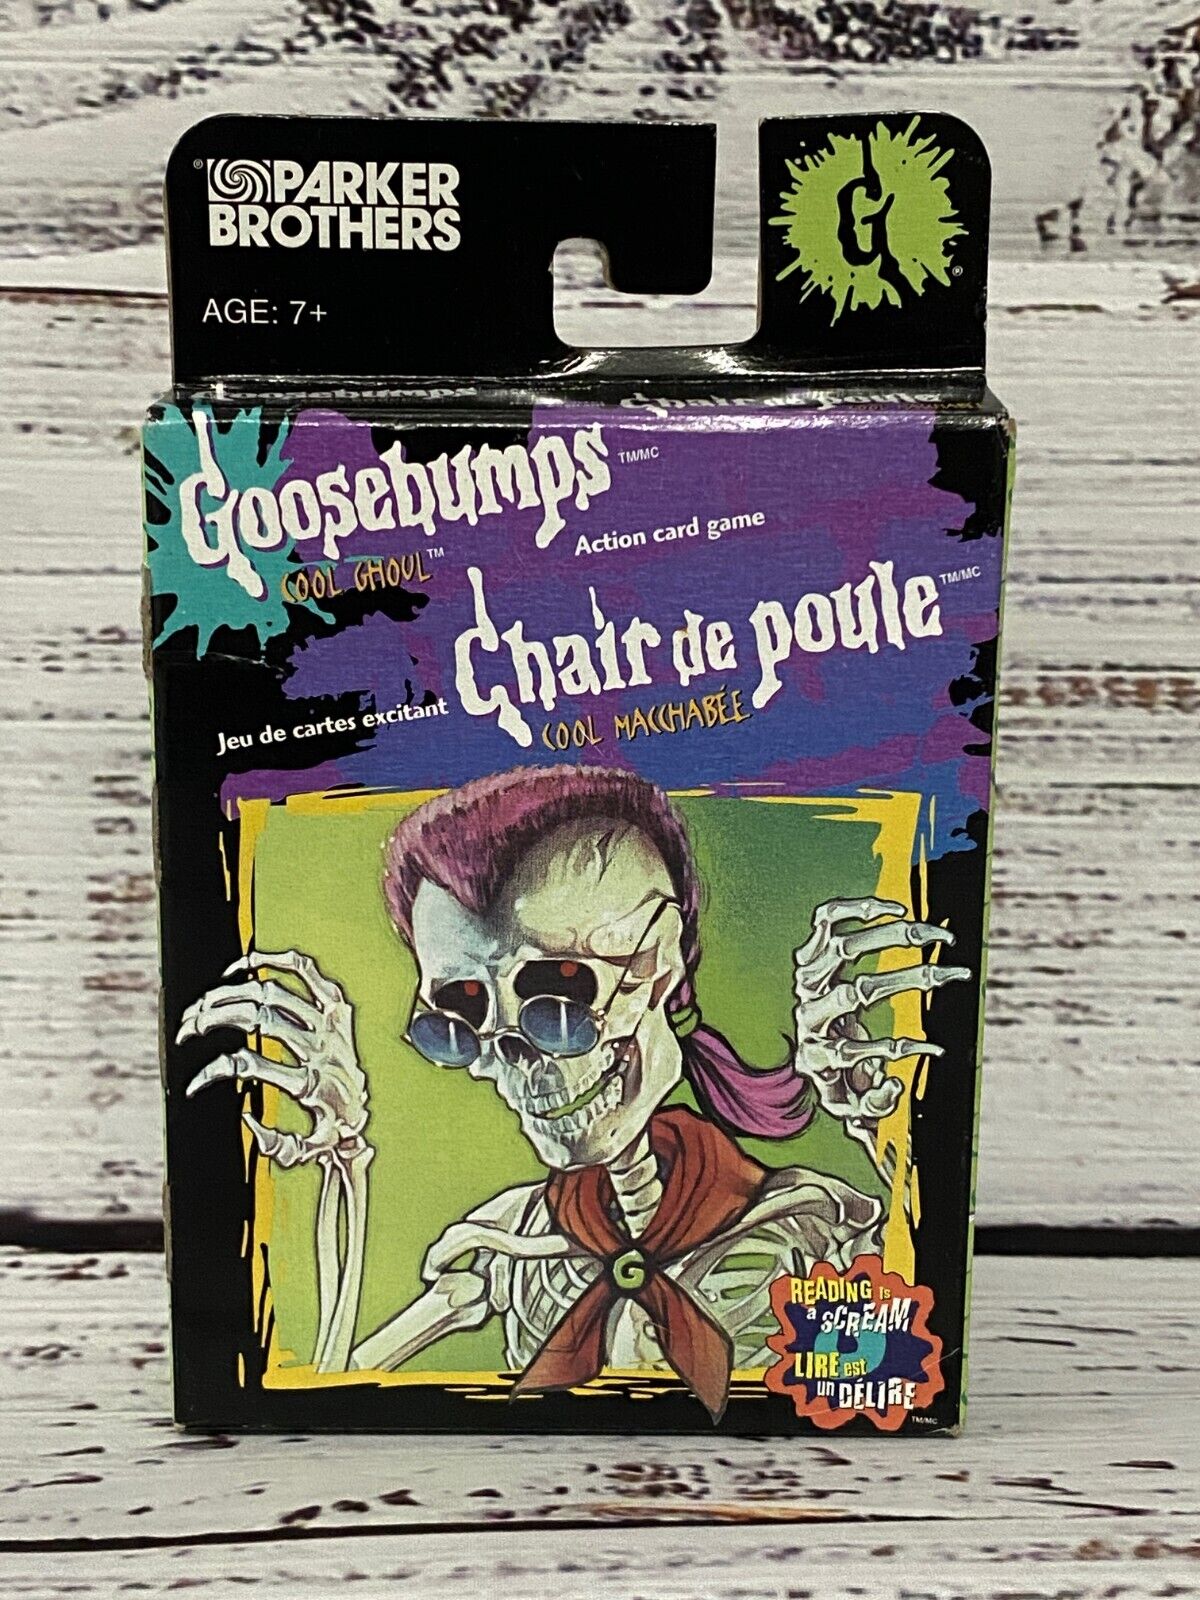 Vintage New 1996 Goosebumps Cool Ghoul Action Card Game Parker Brothers